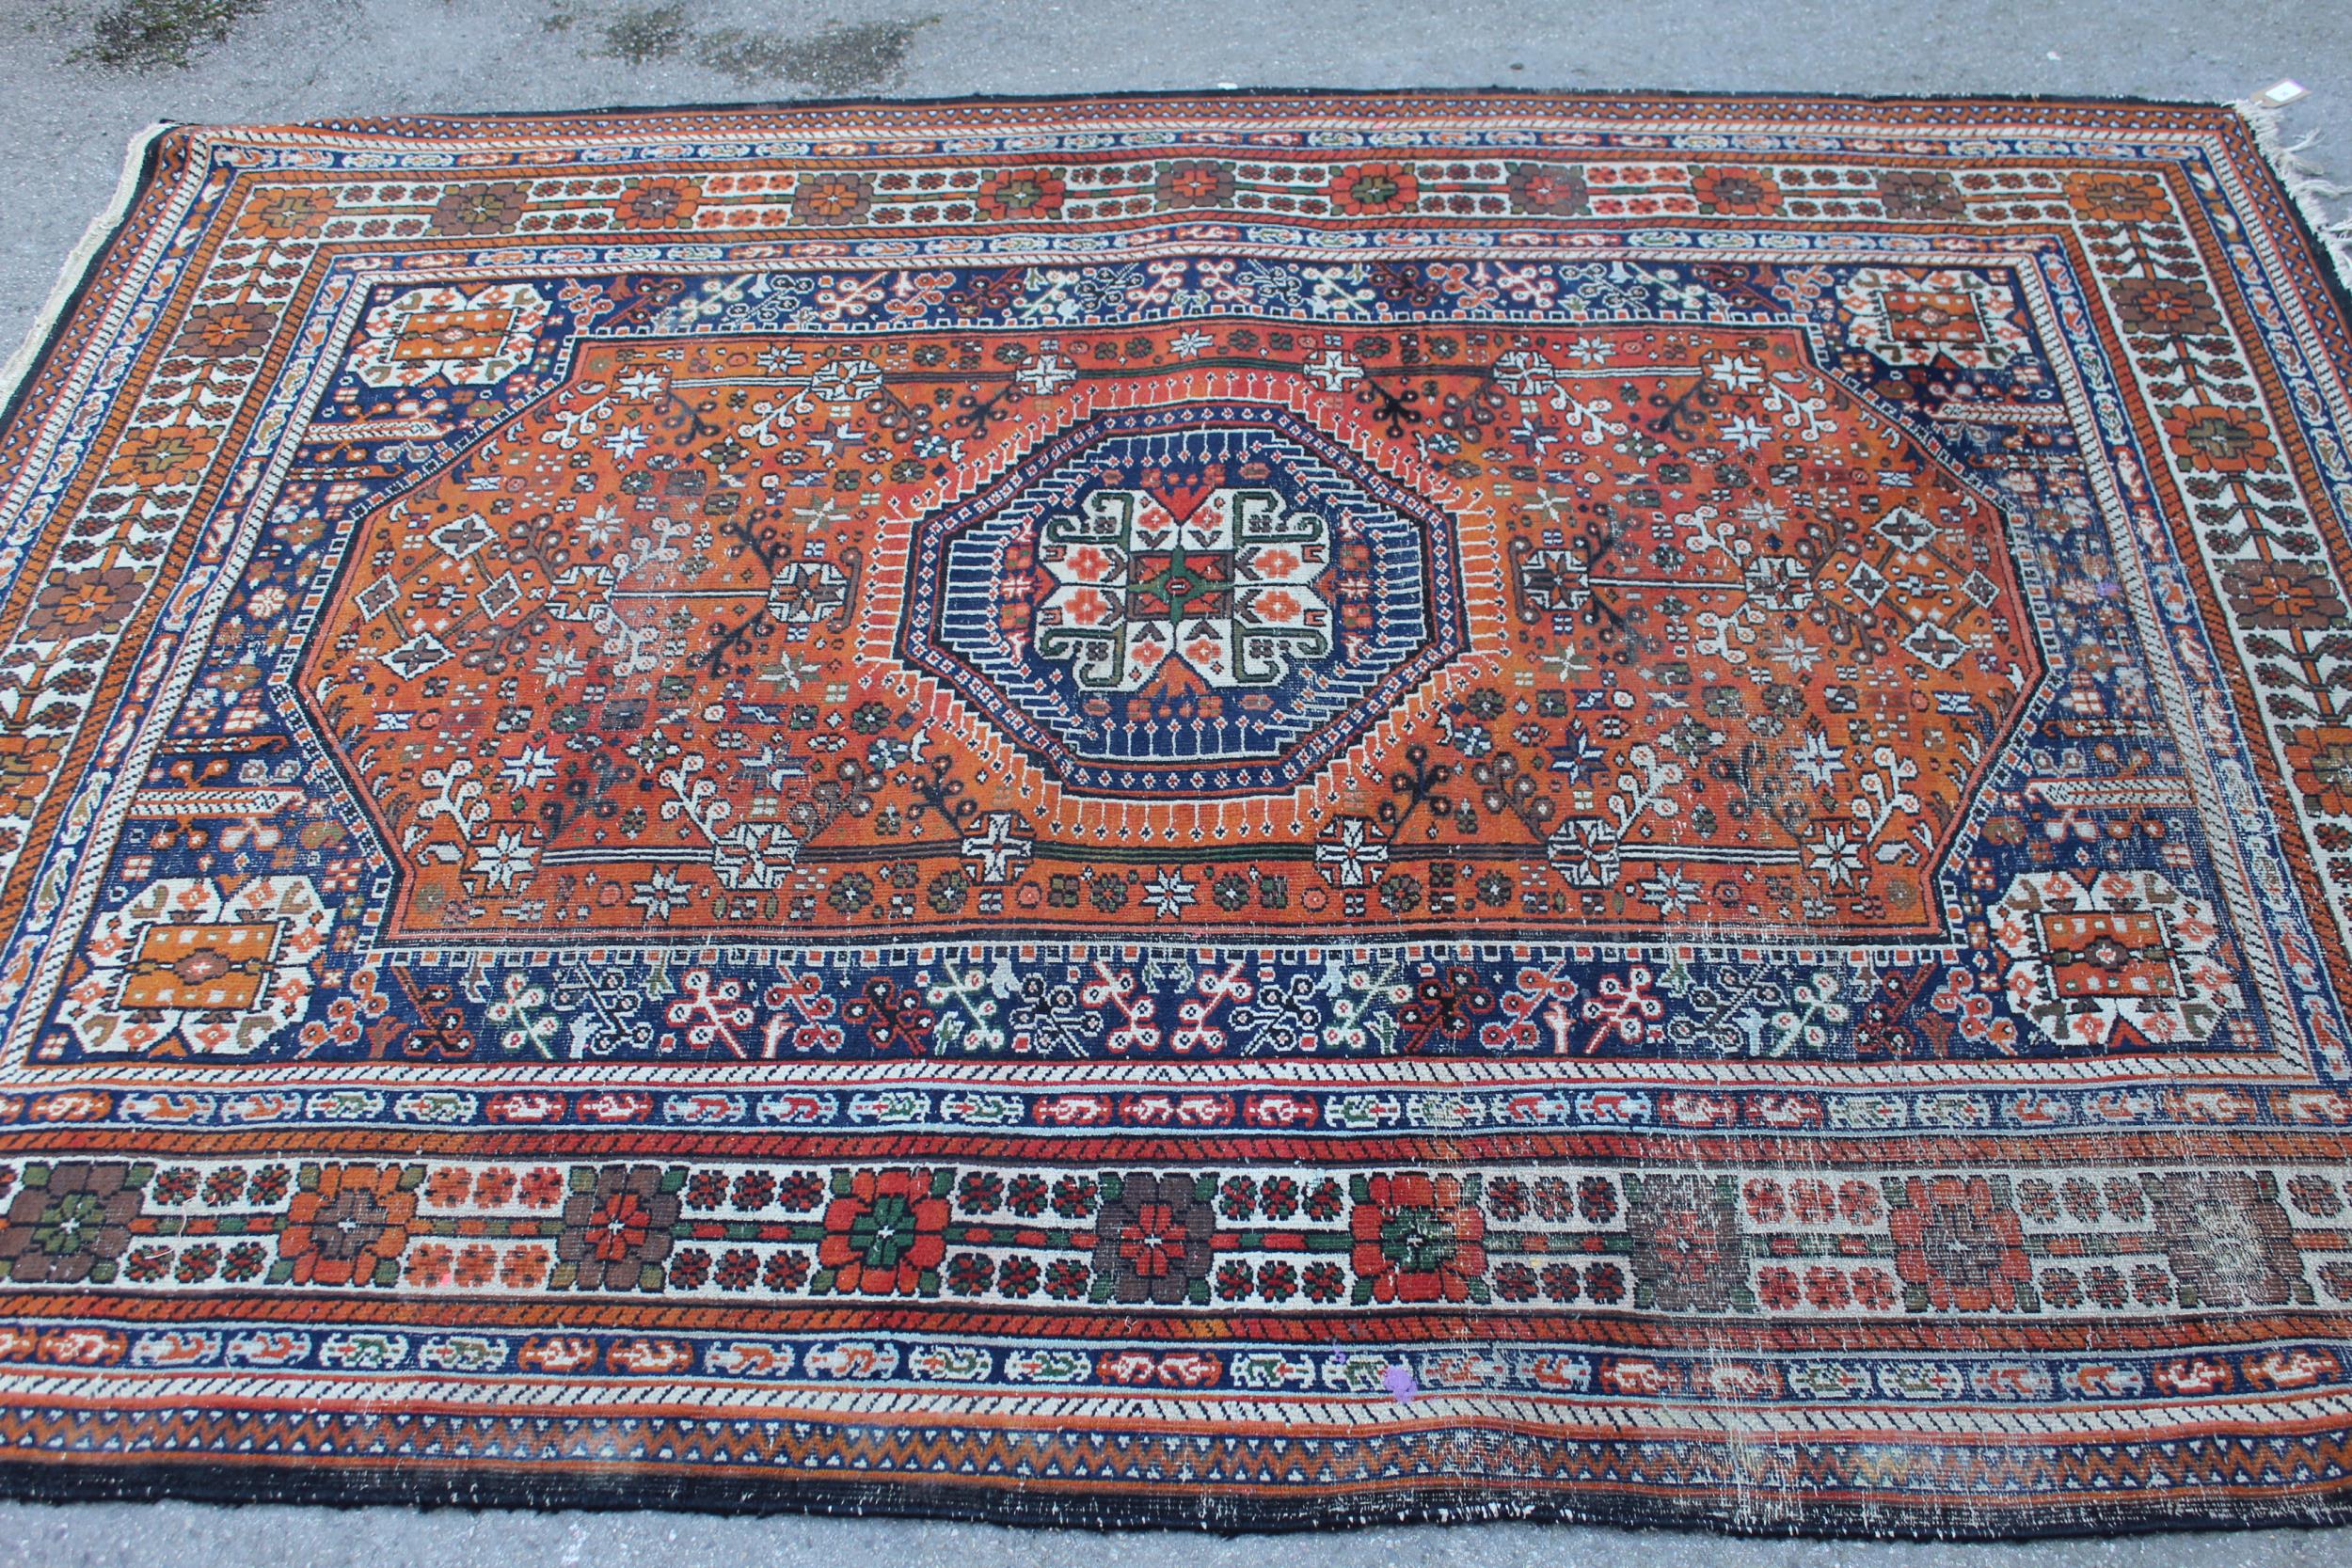 Qashqai rug of central floral medallion and all-over floral design with border, approximately